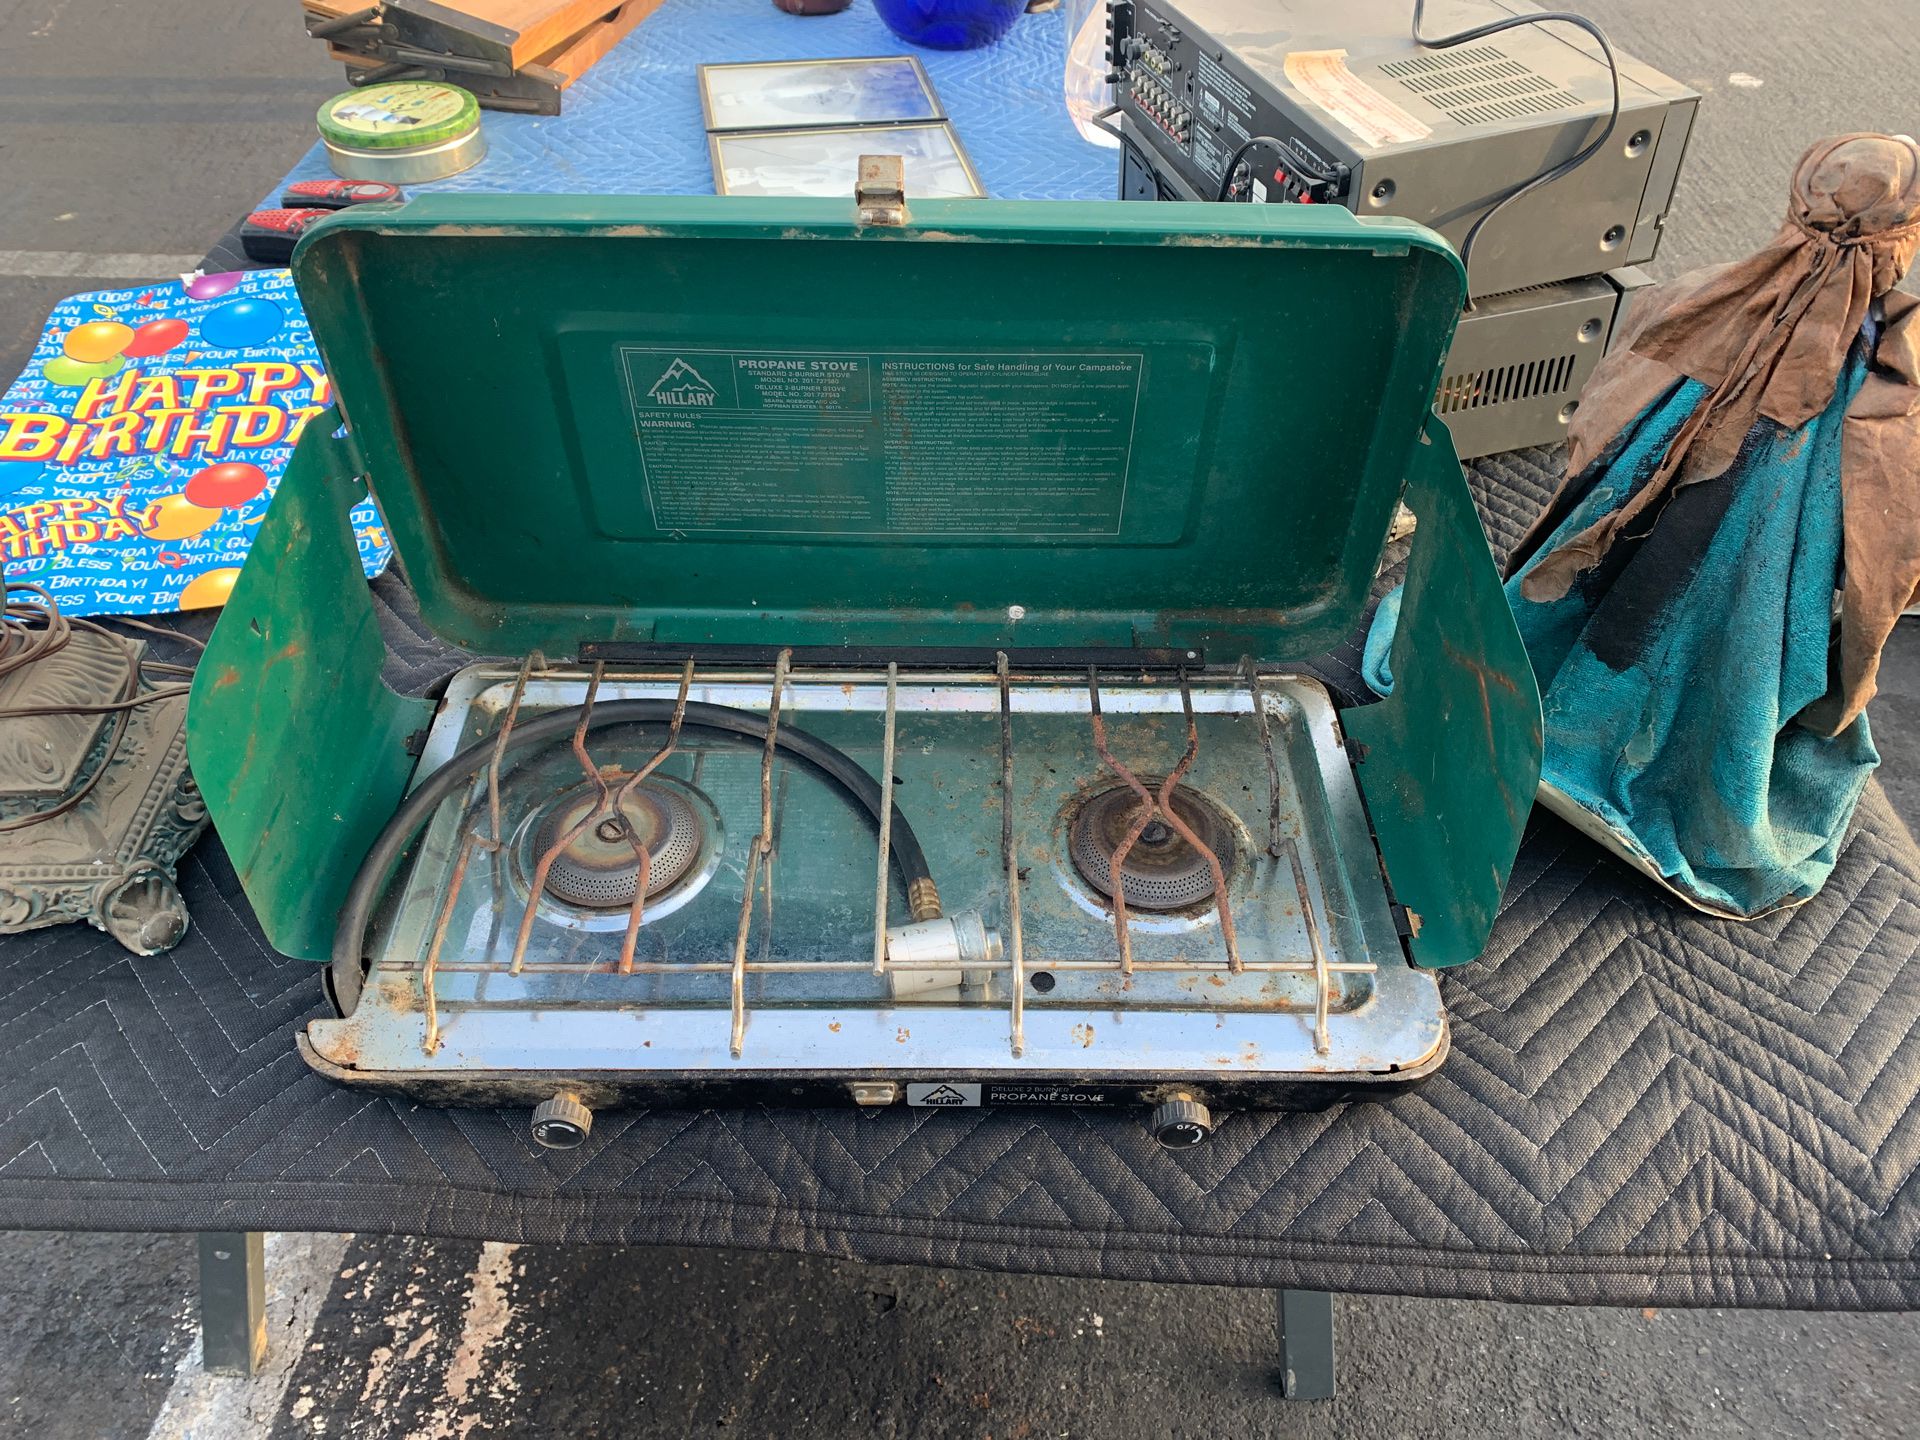 Hillary deluxe 2 burner propane stove camping